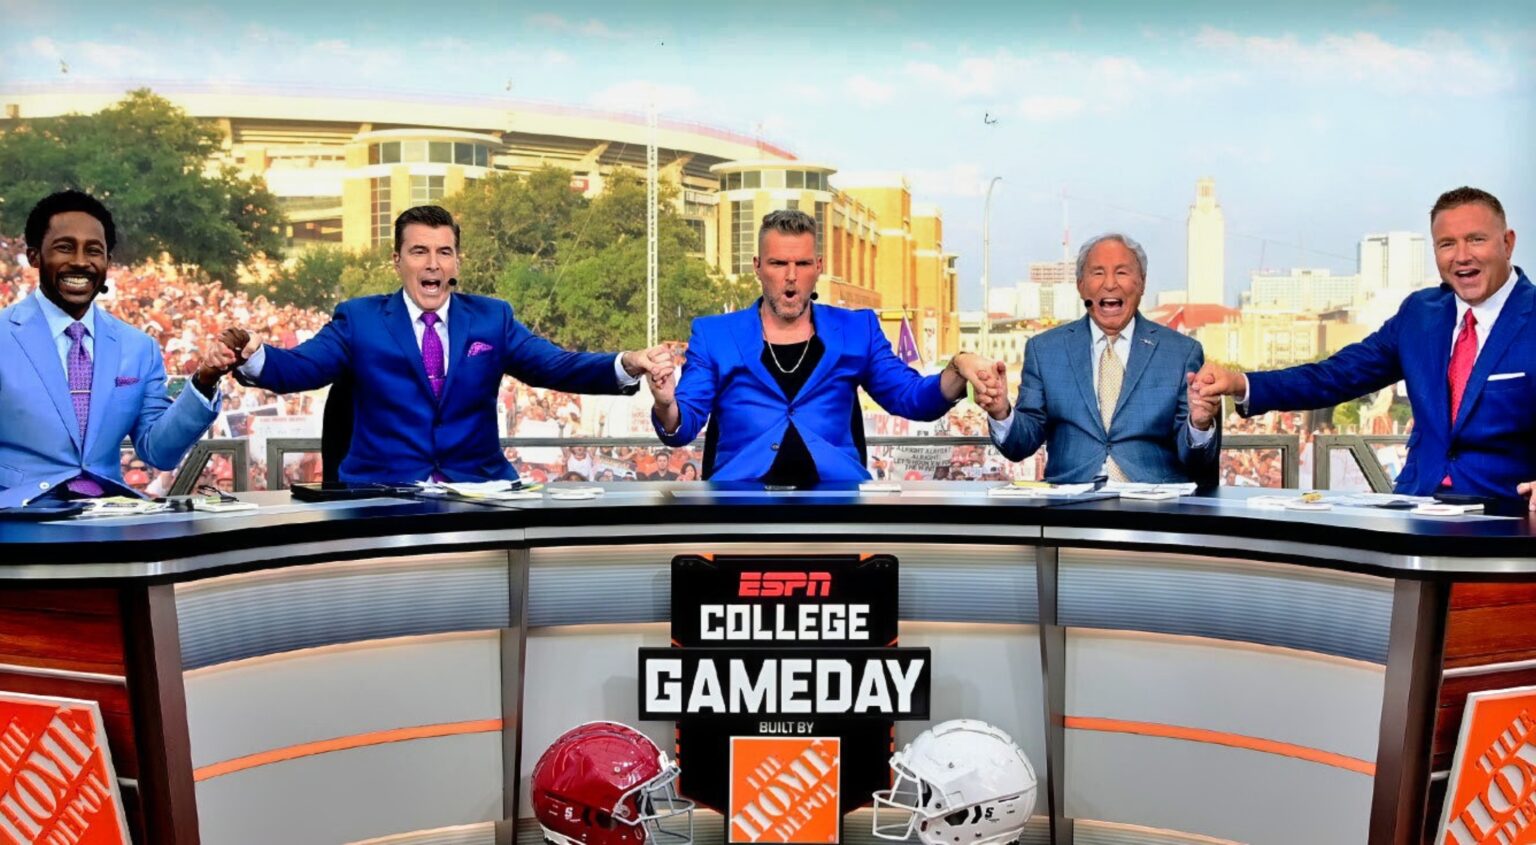 PFT Commentor Announced As 'College GameDay' Guest Picker